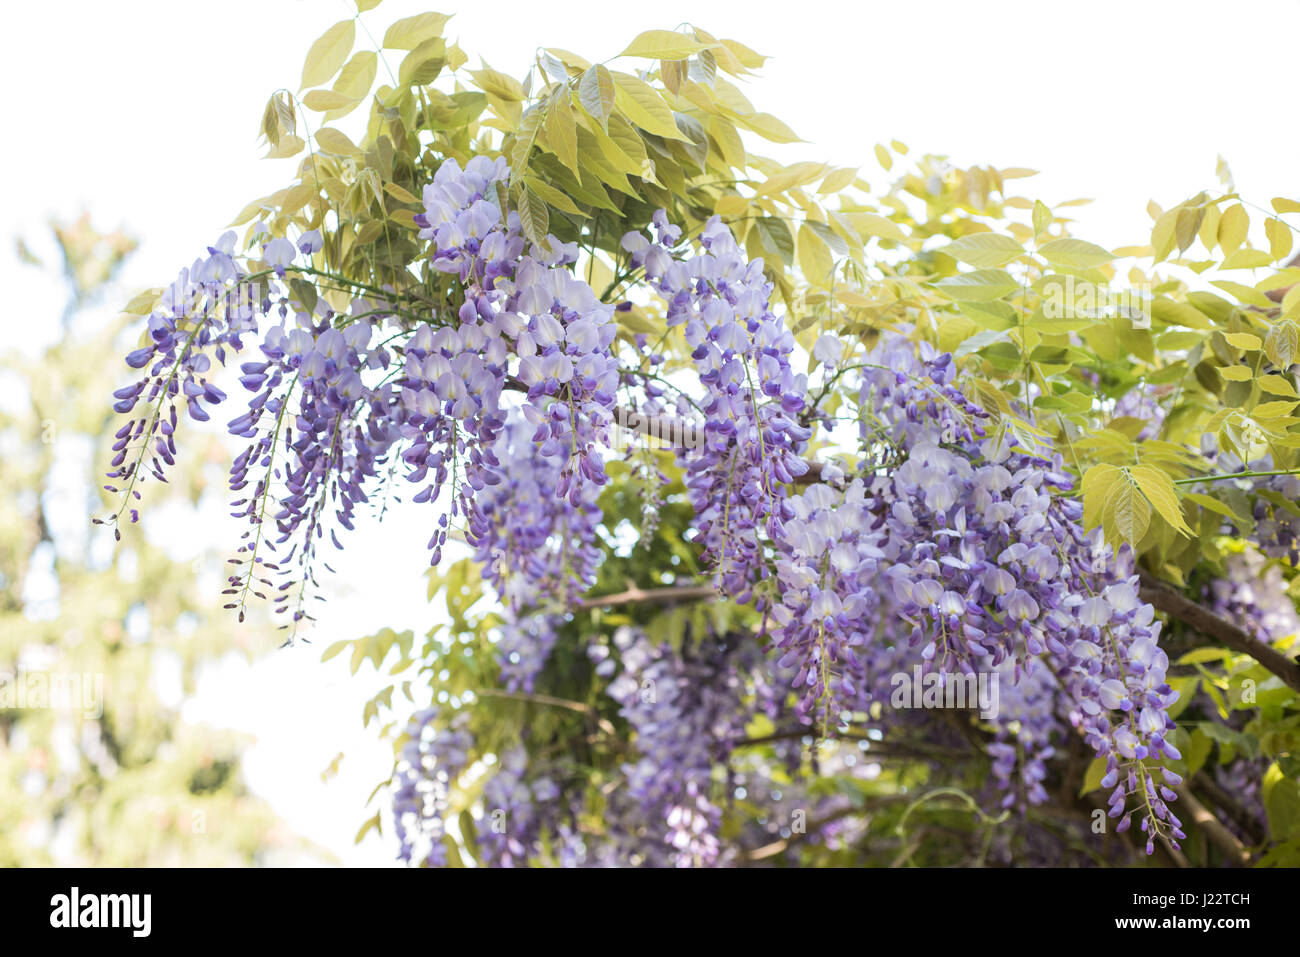 Hanging purple wisteria bunches   flowers in spring Stock Photo